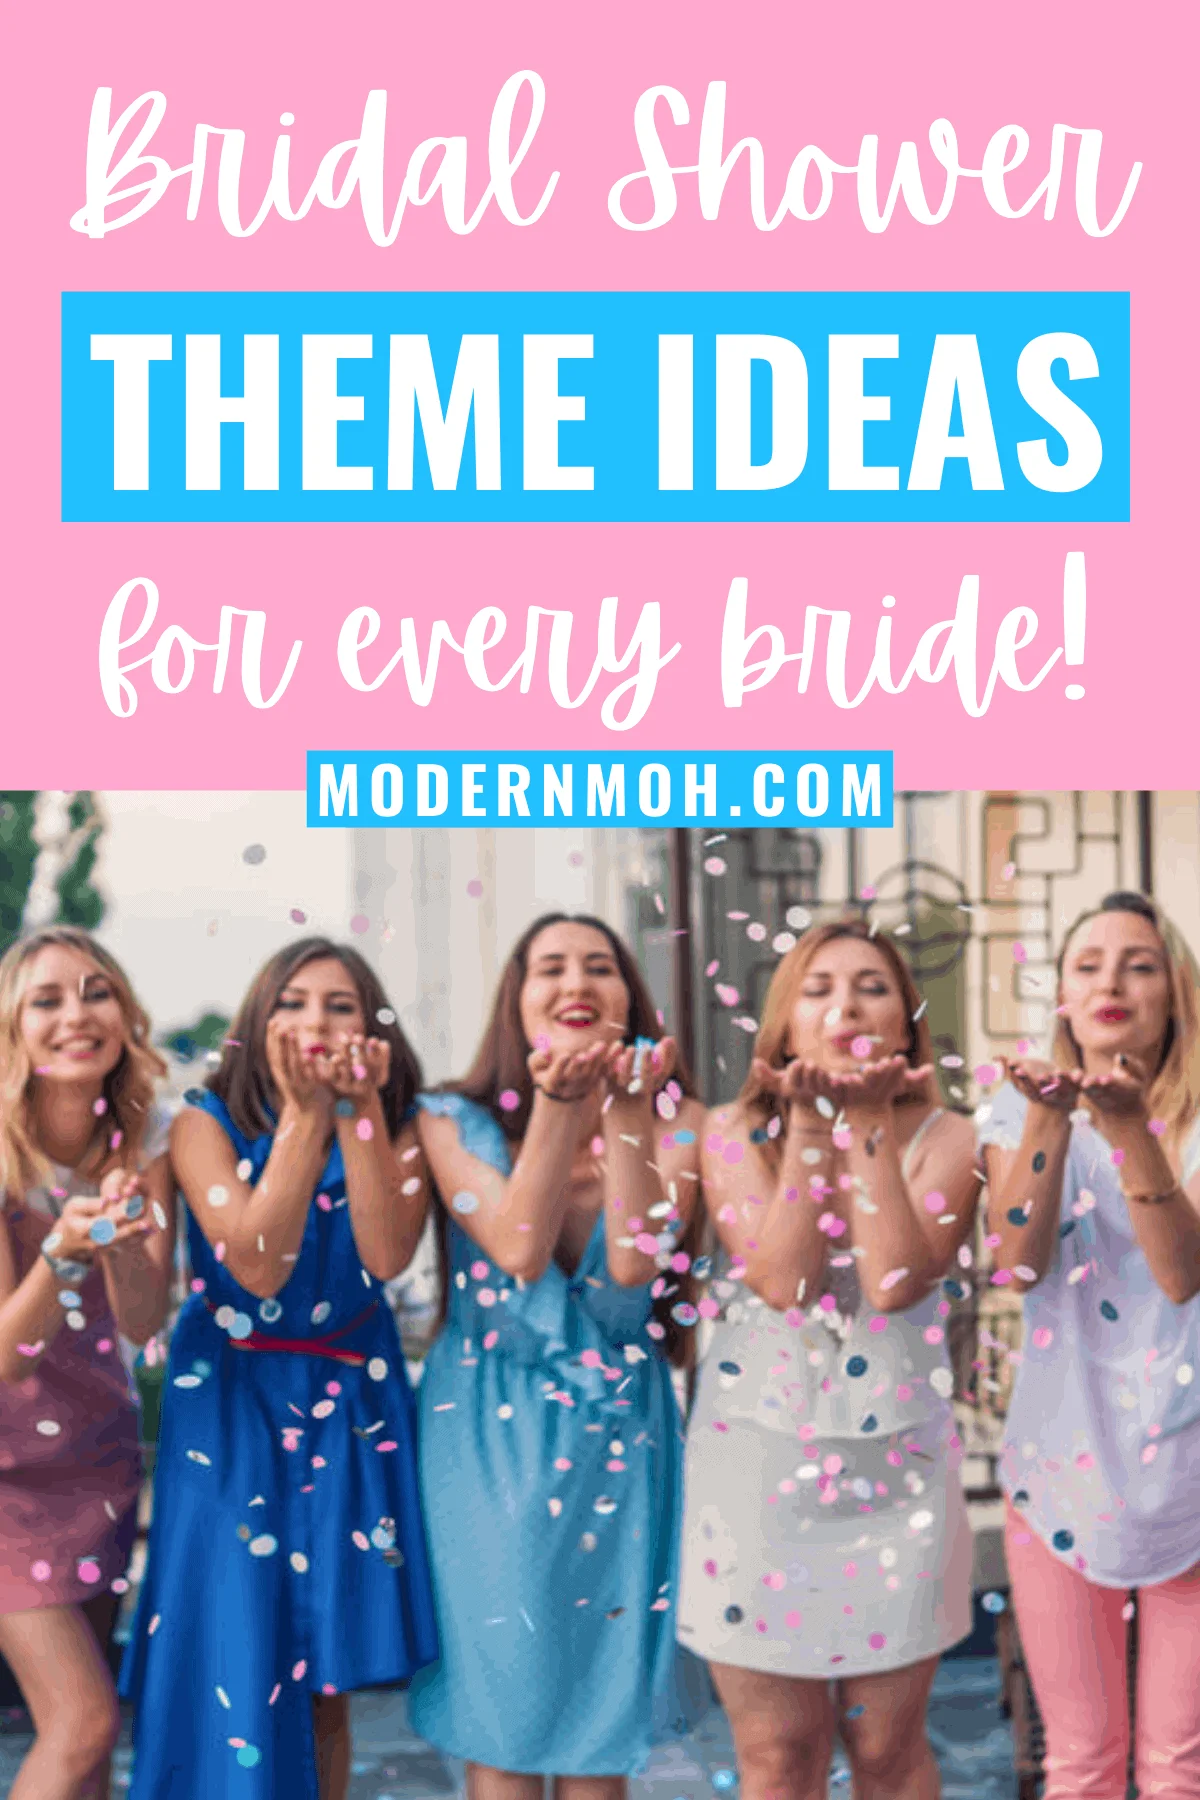 8 Bridal Shower Themes for the Modern Bride